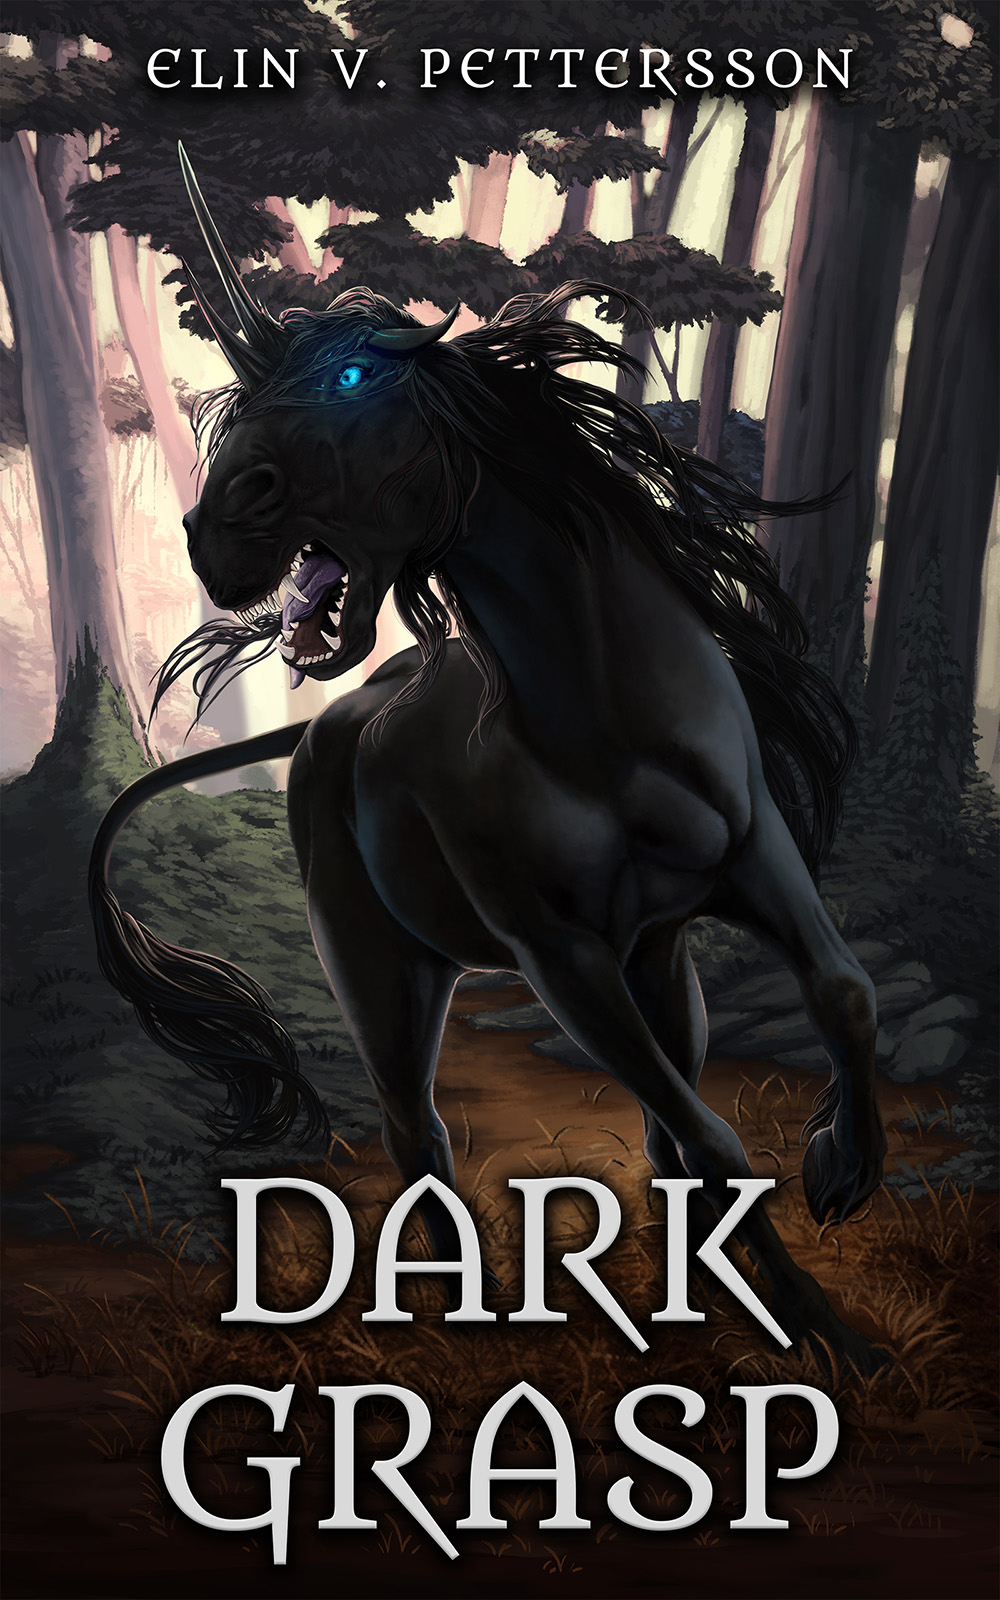 High Fantasy book with a hungry flesh-eating unicorn.